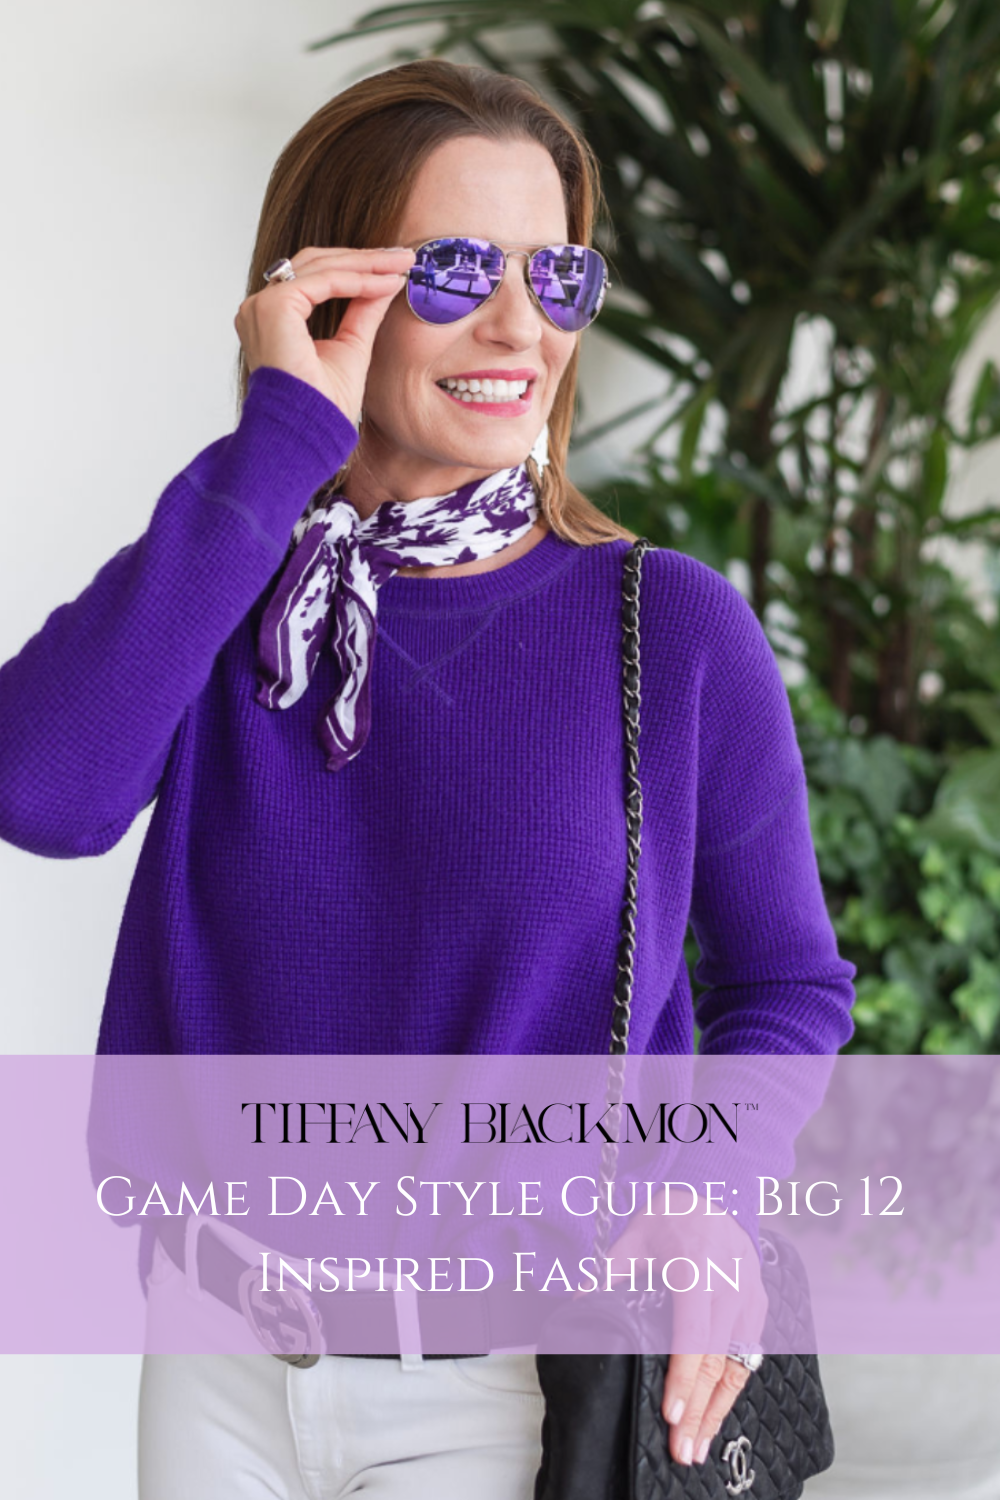 Game Day Outfits 

#game #college #football #sports #big12 #tailgate #Gofrogs #sooner #hookem #Sicem #red #blue #purple #green